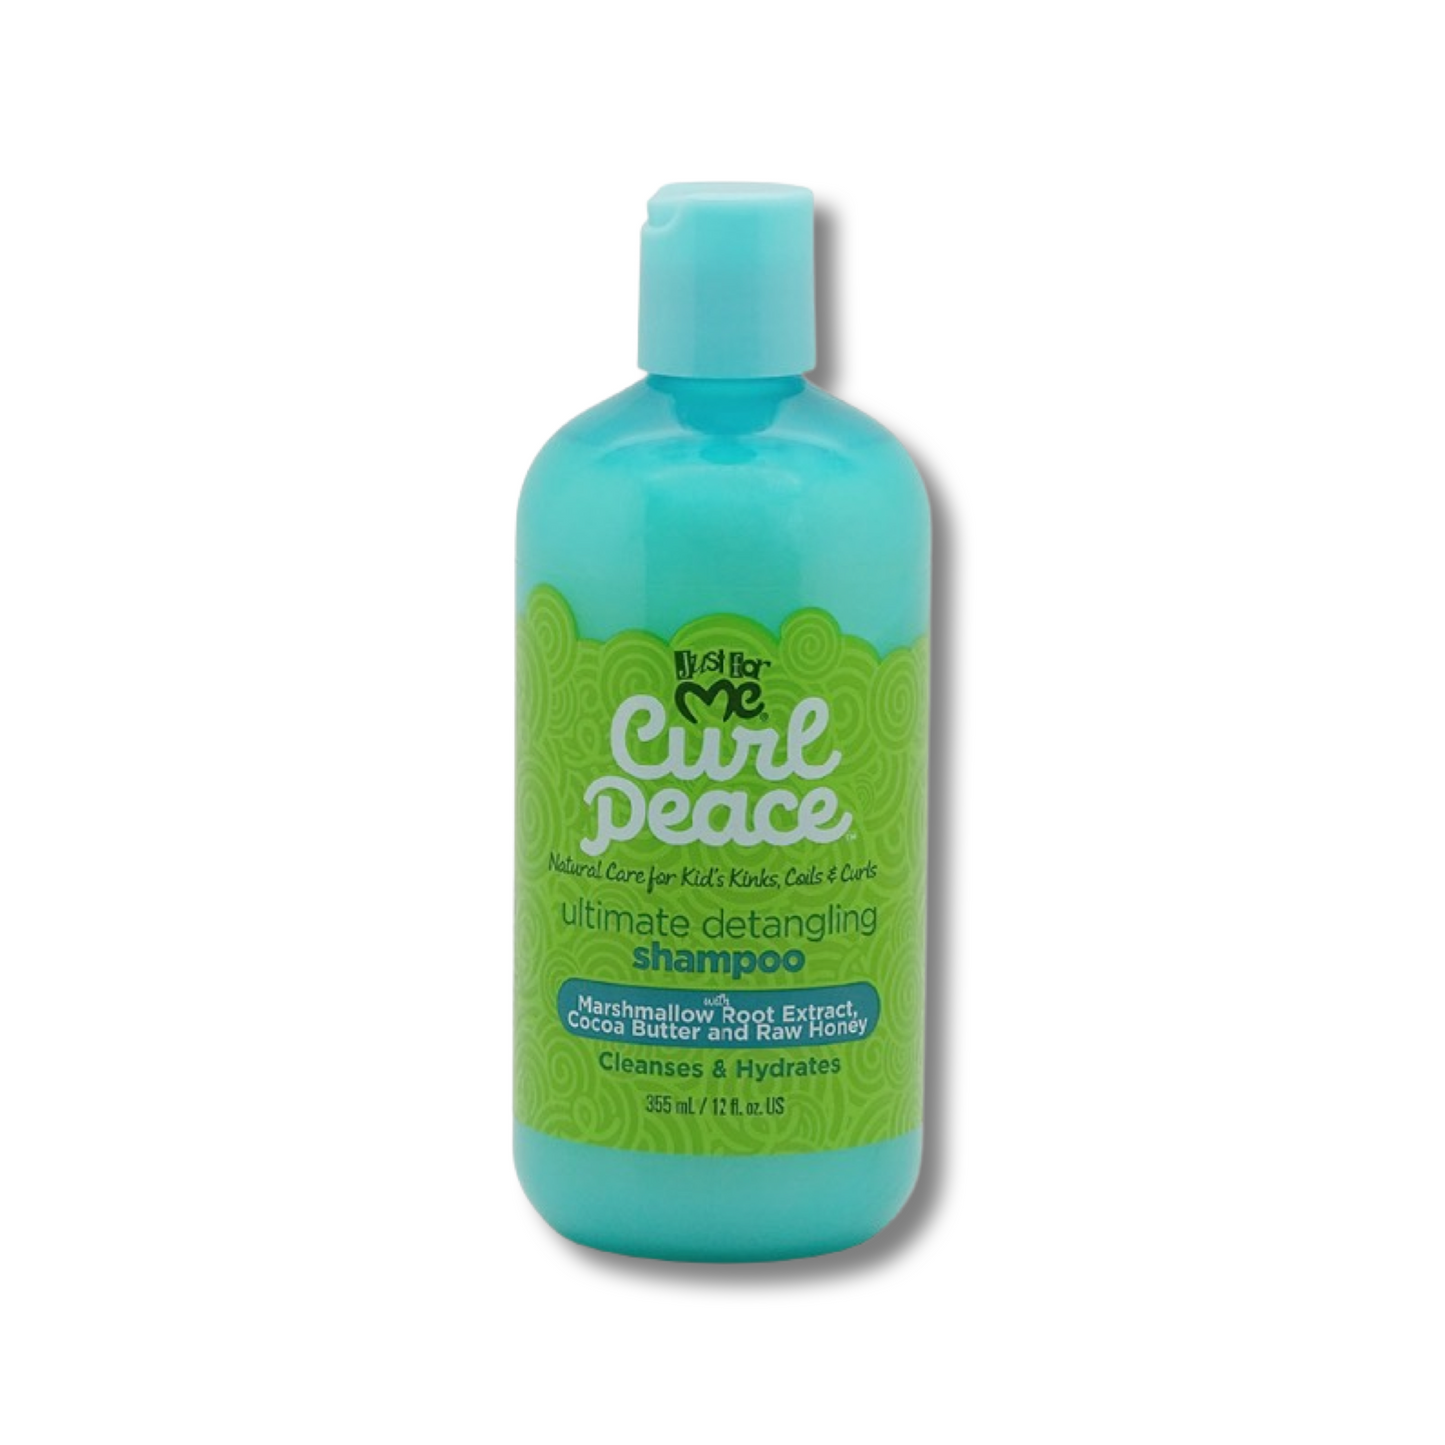 Just For Me Curl Peace Ultimate Detangling Shampoo - 12 Oz